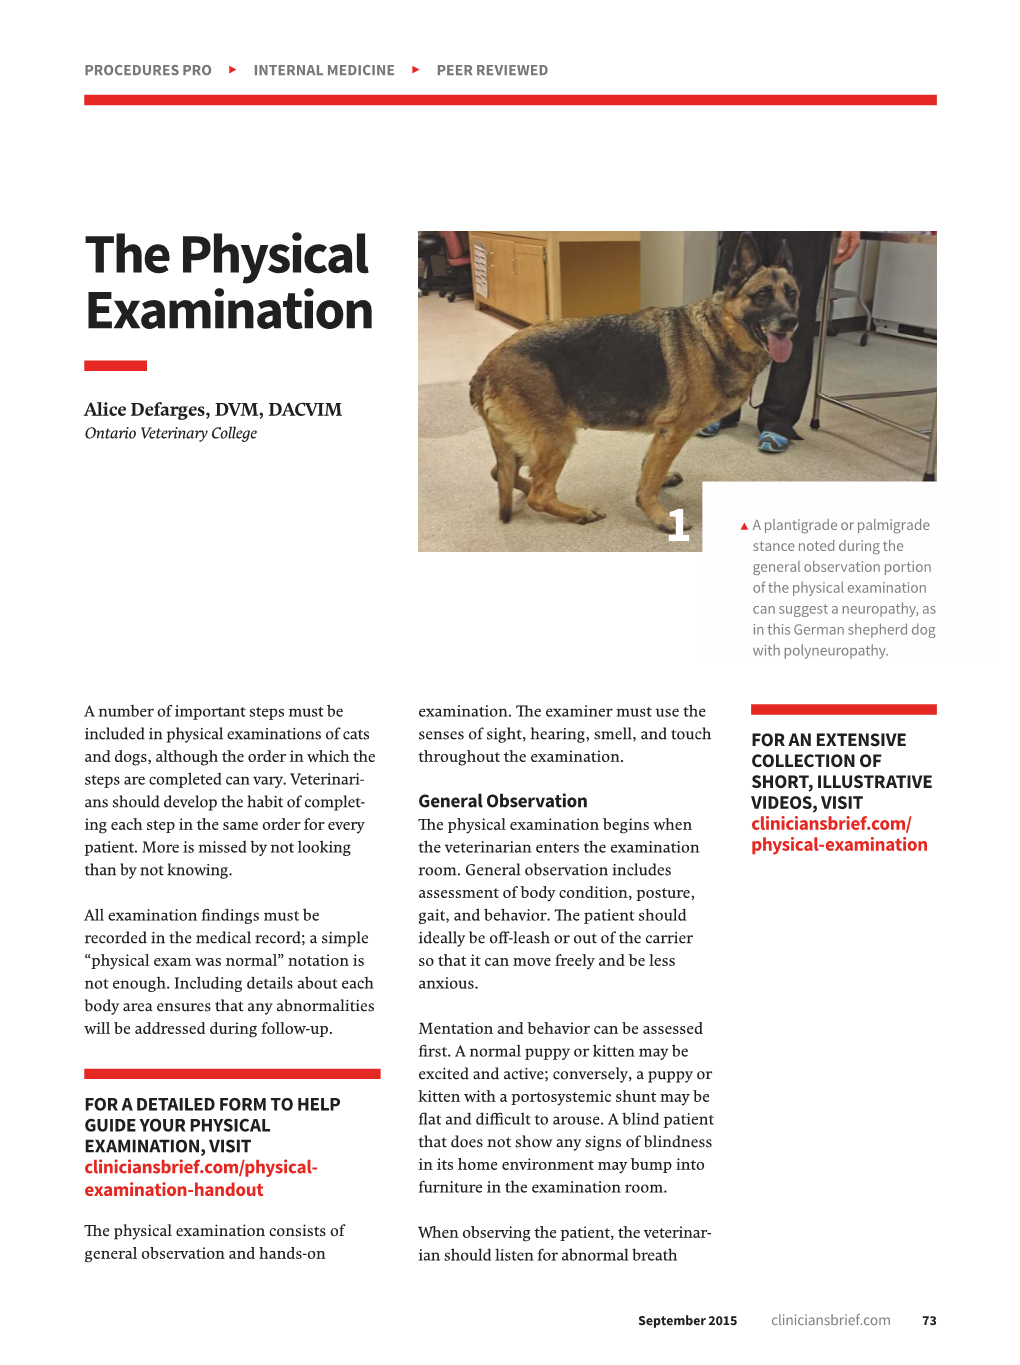 The Physical Examination